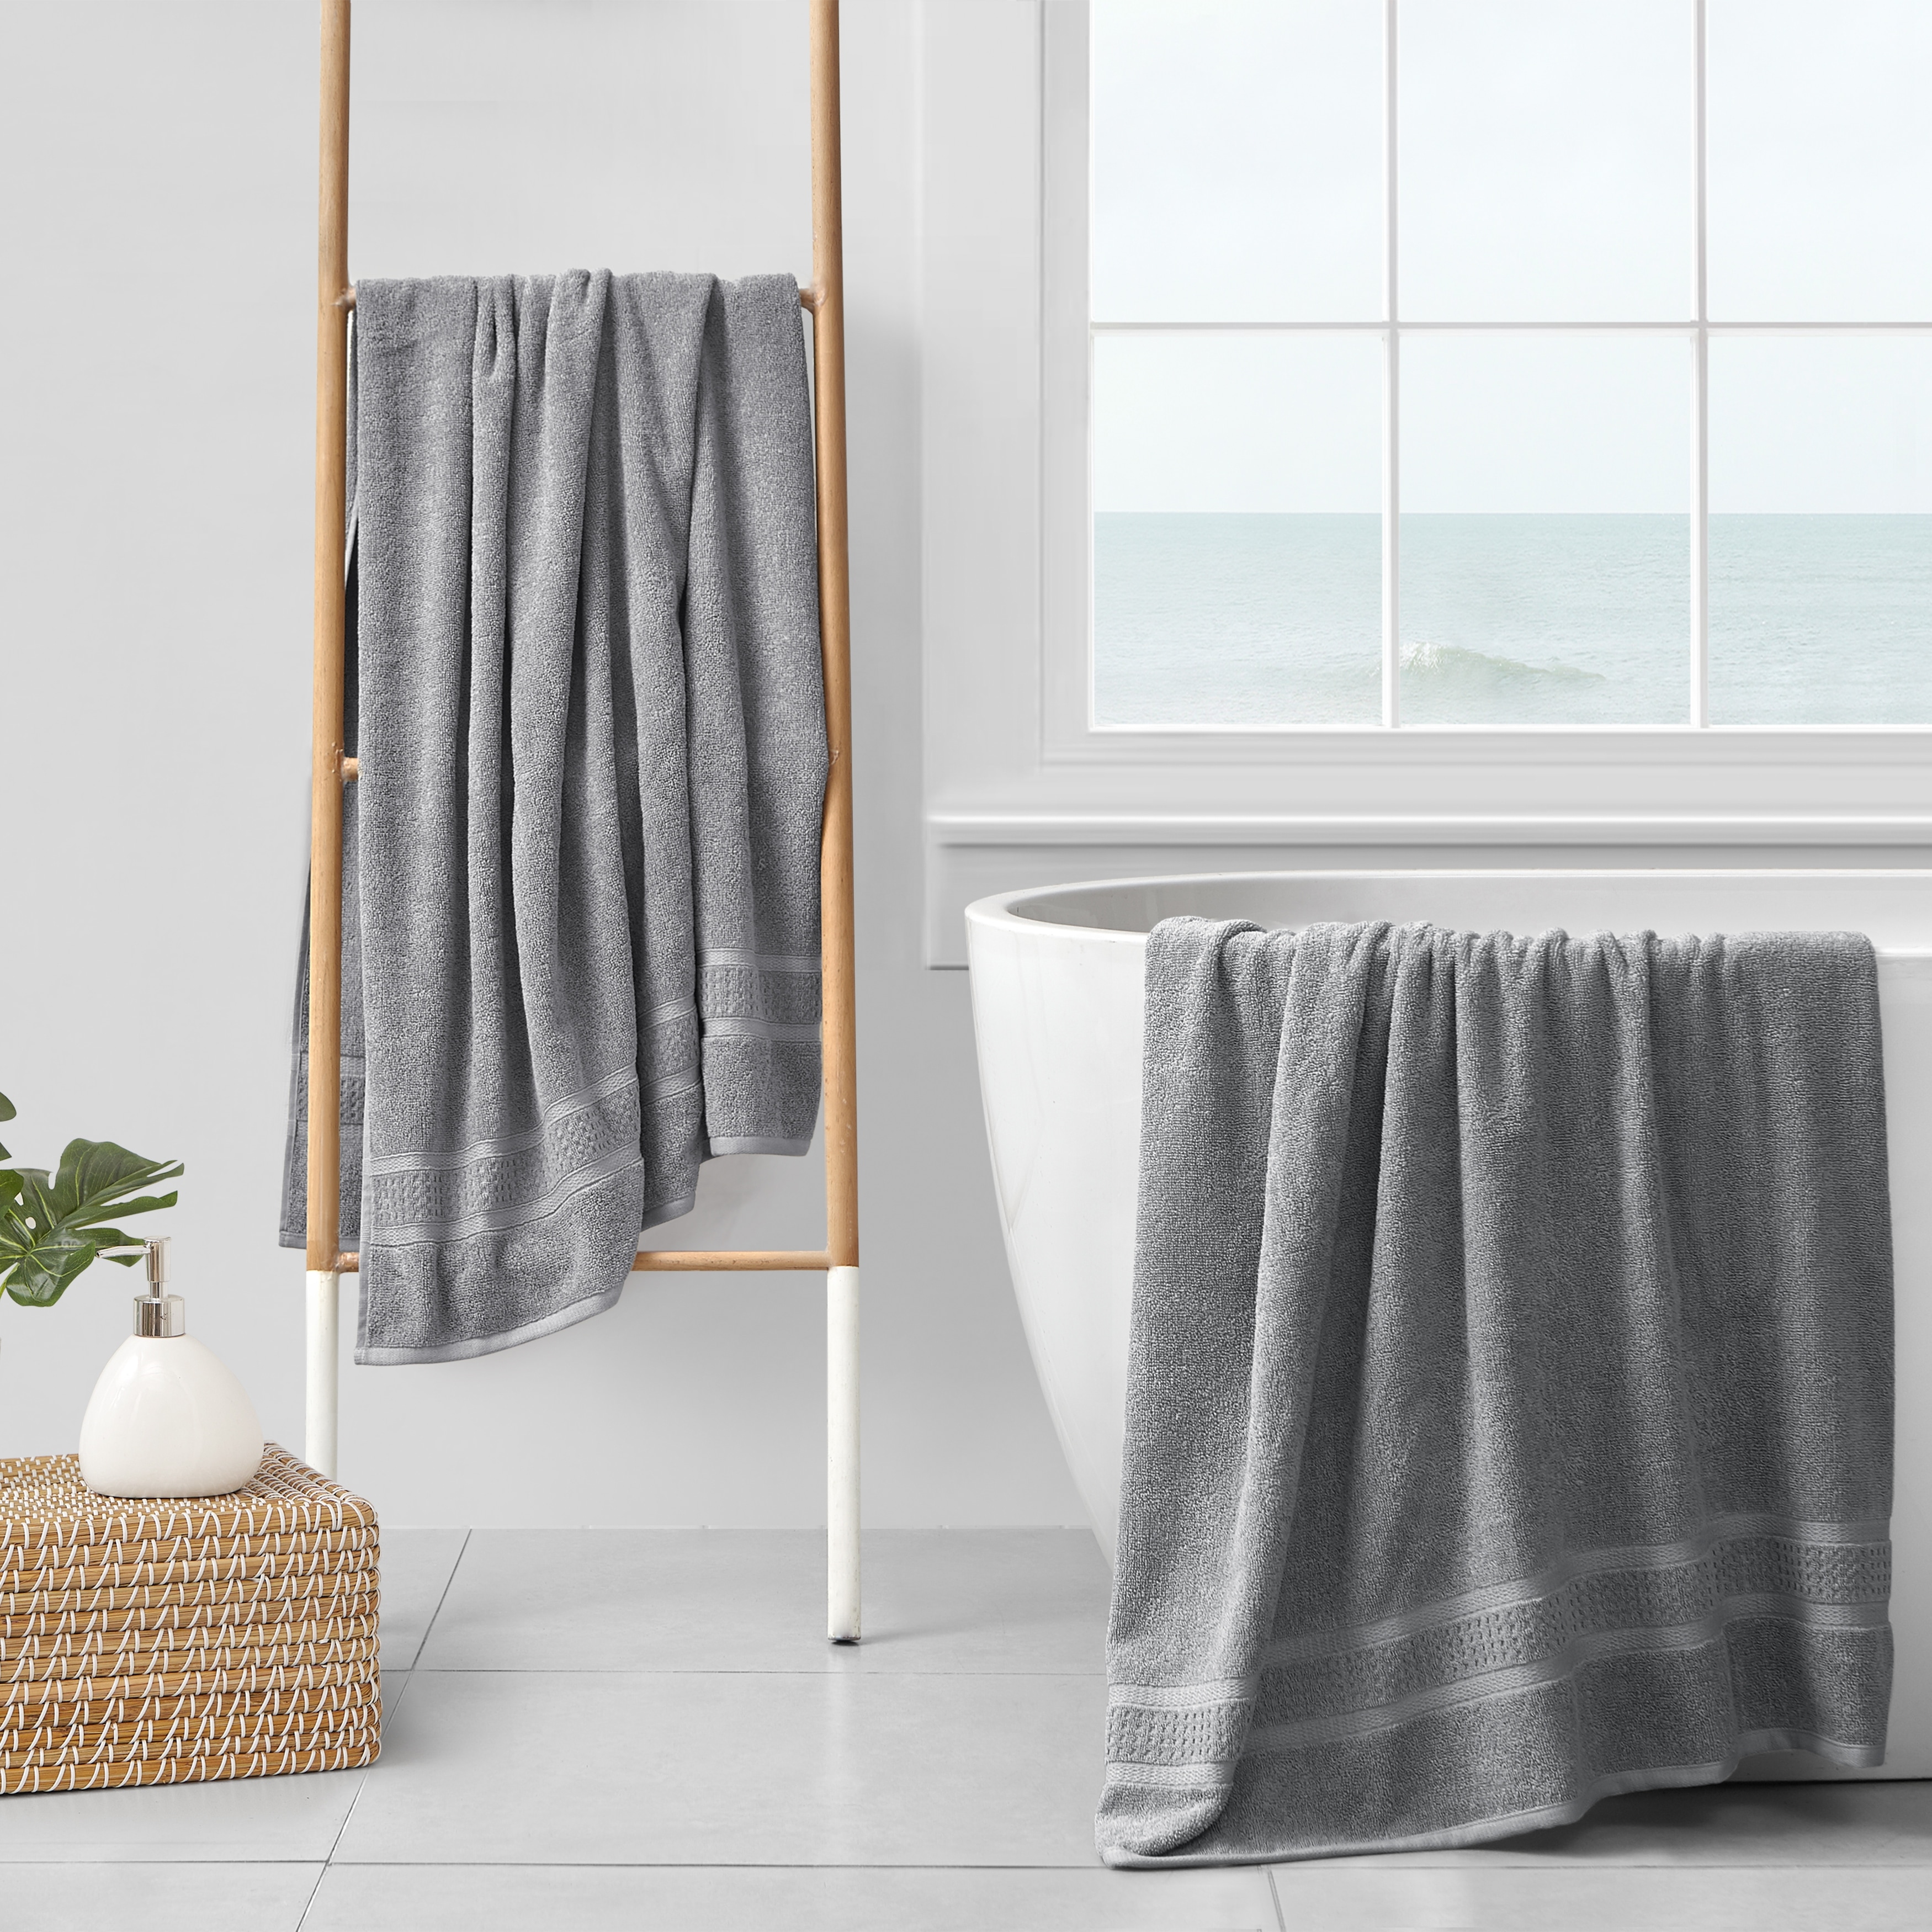 https://ak1.ostkcdn.com/images/products/is/images/direct/0114a333bd5b85c5277335f29c938994c98afd00/Nautica-Oceane-Solid-Wellness-Towel-Collection.jpg